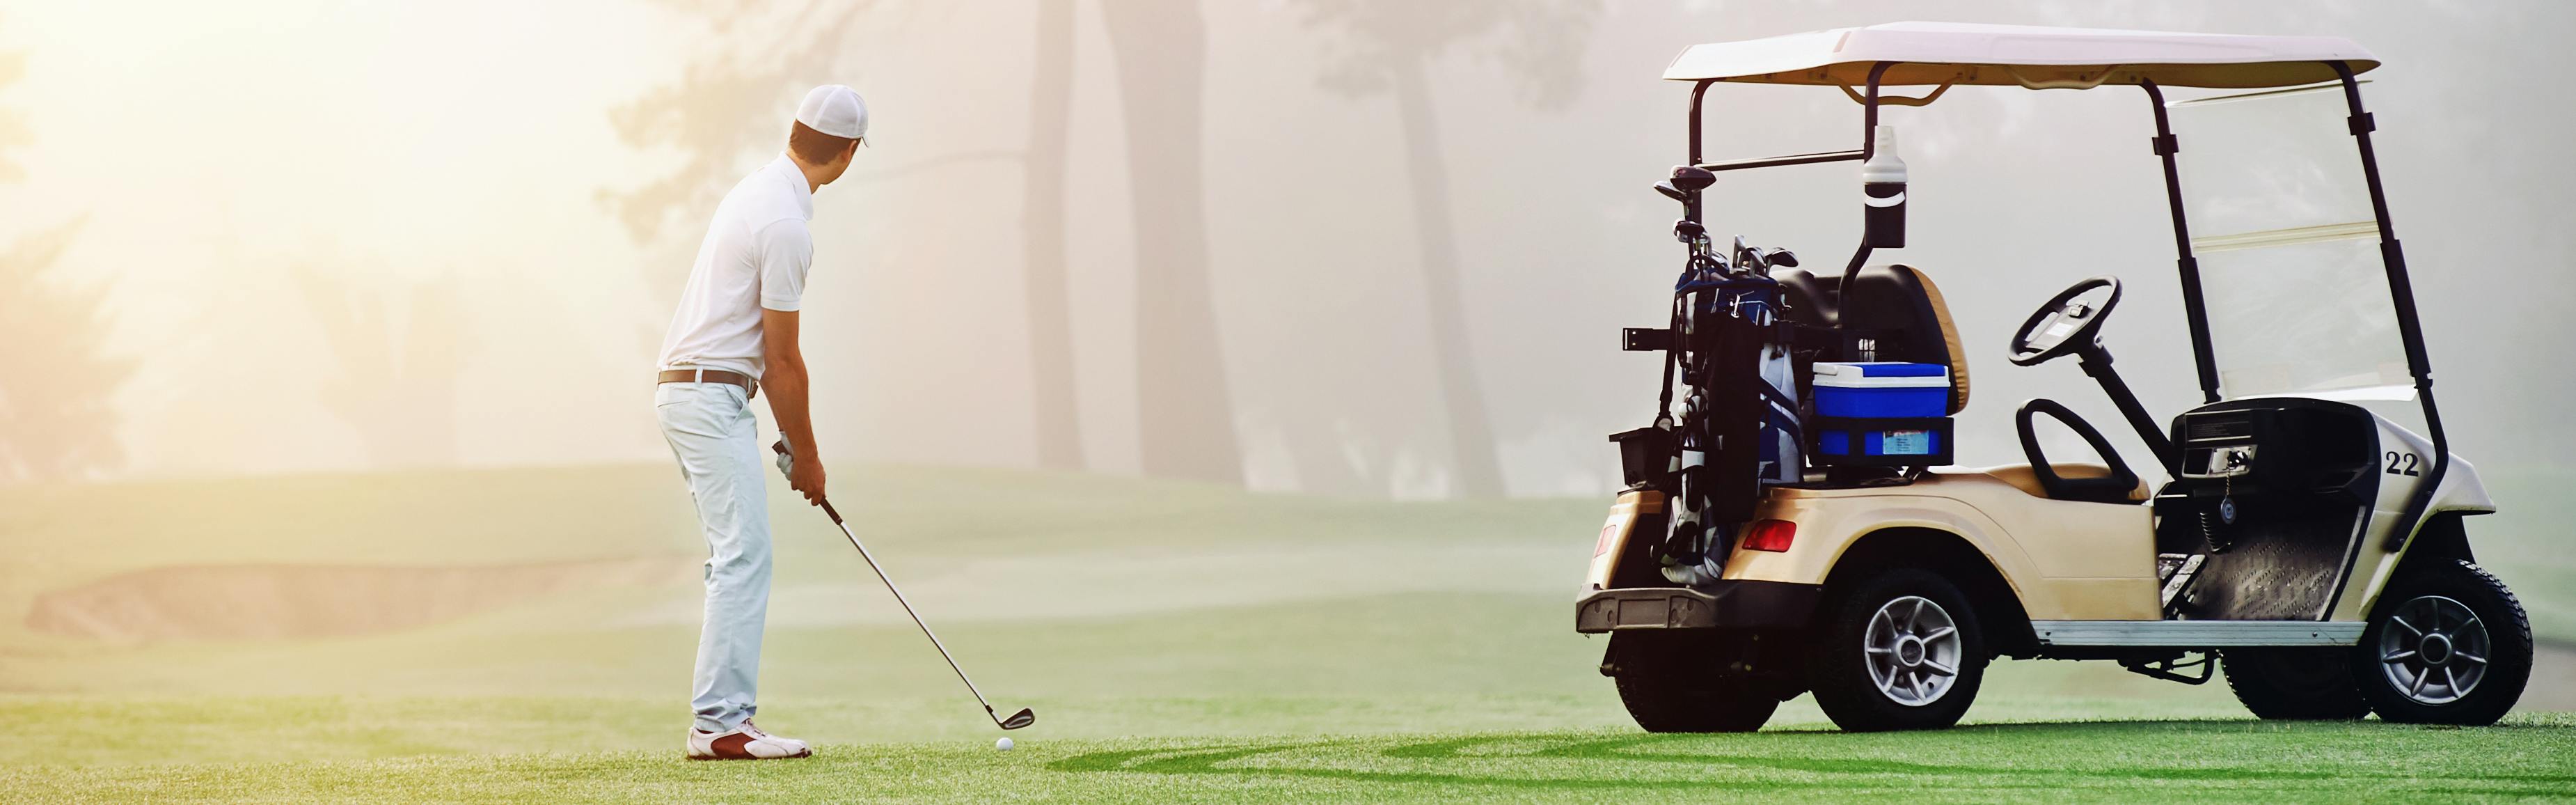 A Guide to Golf Club Distance - Average Distances | Curated.com